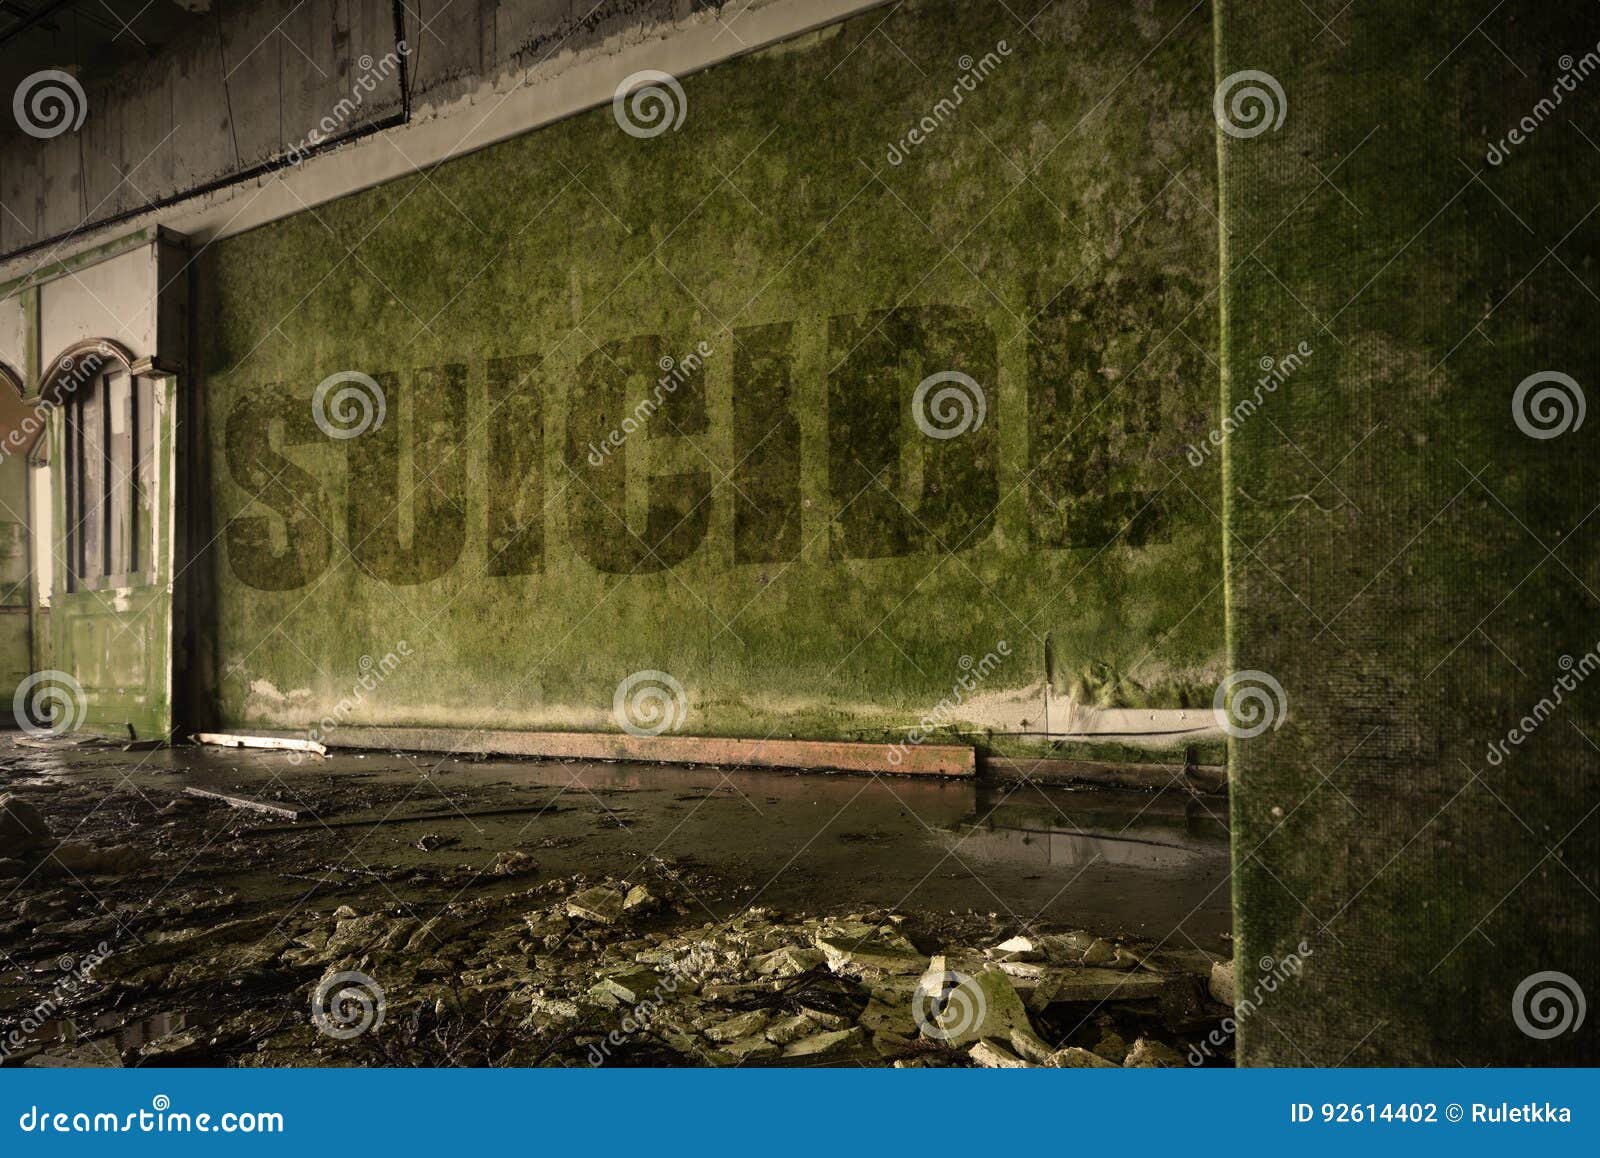 text suicide on the dirty wall in an abandoned ruined house